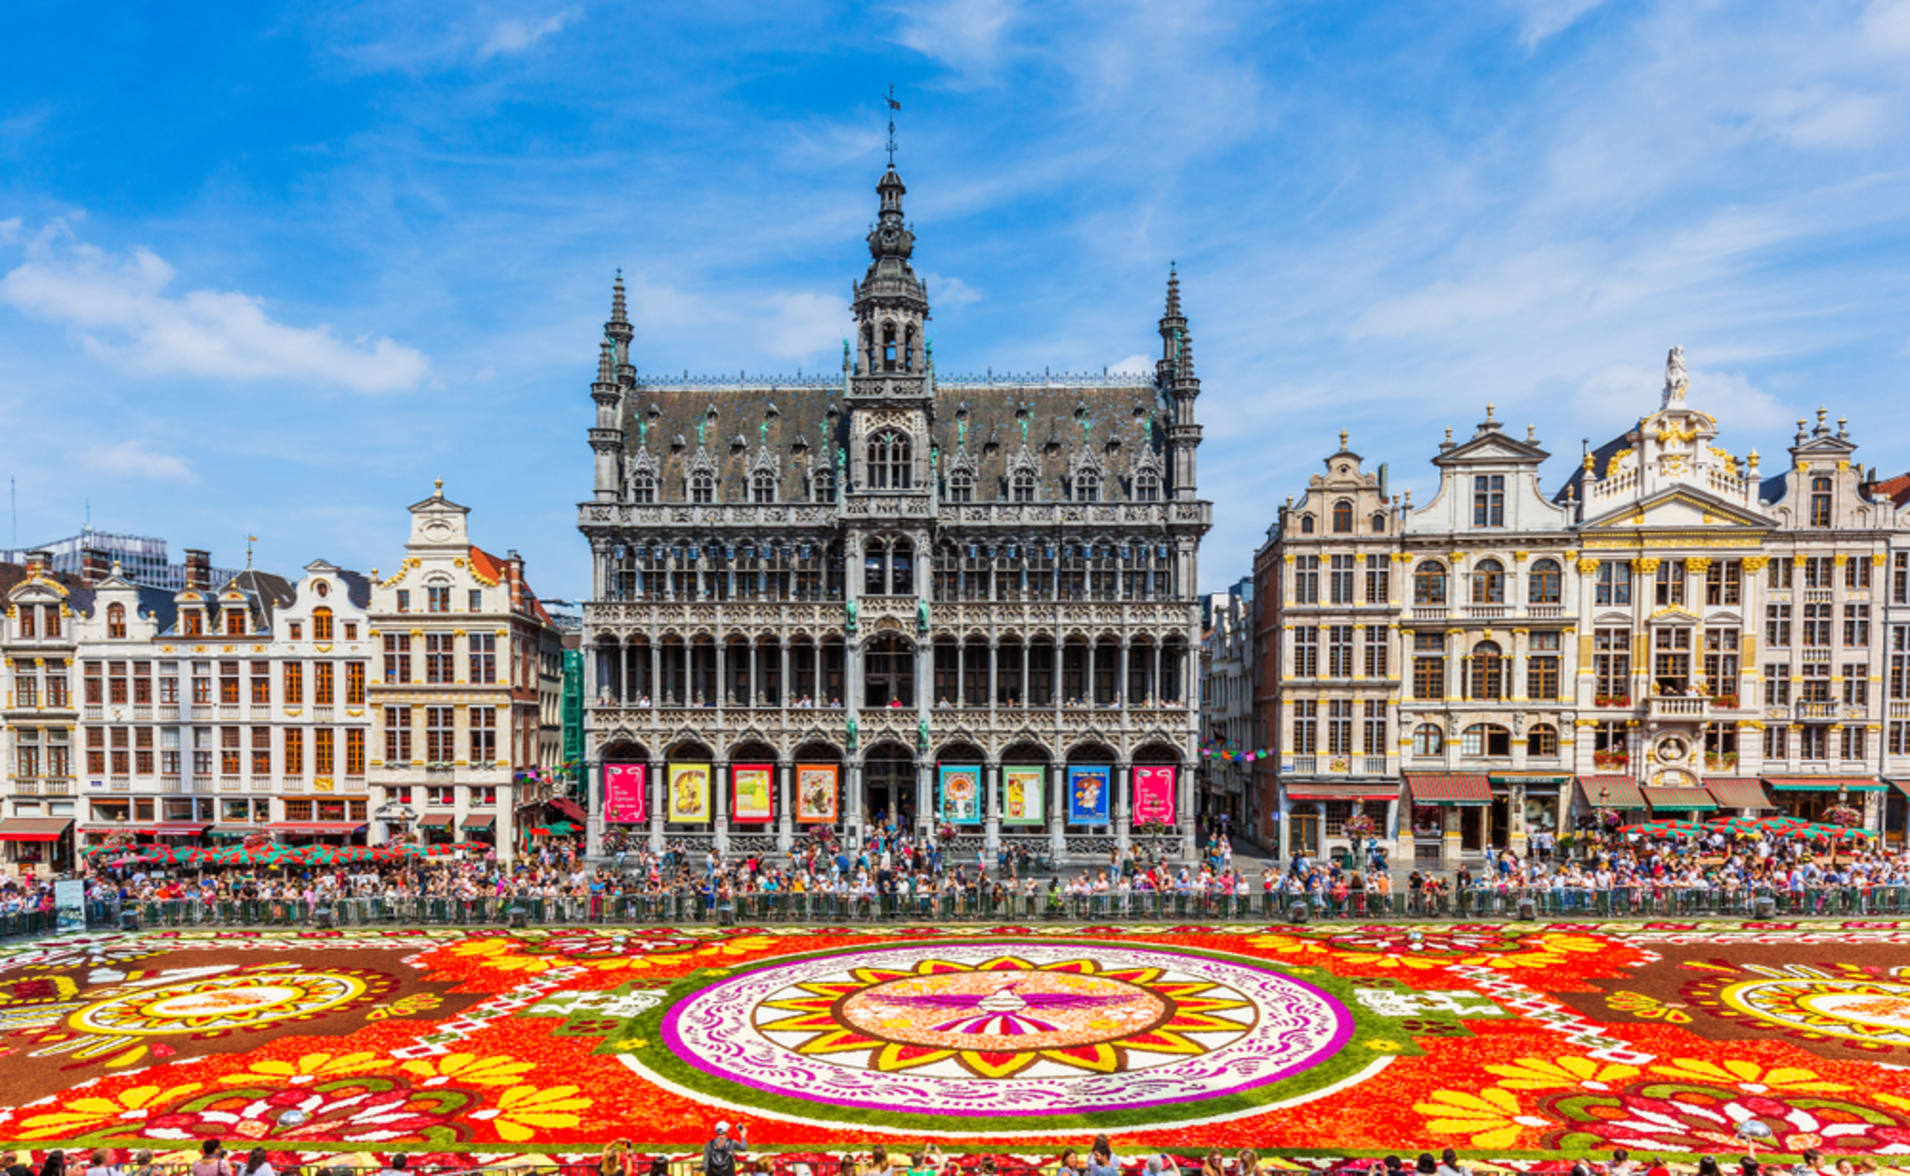 The Grand Place Square in Brussels